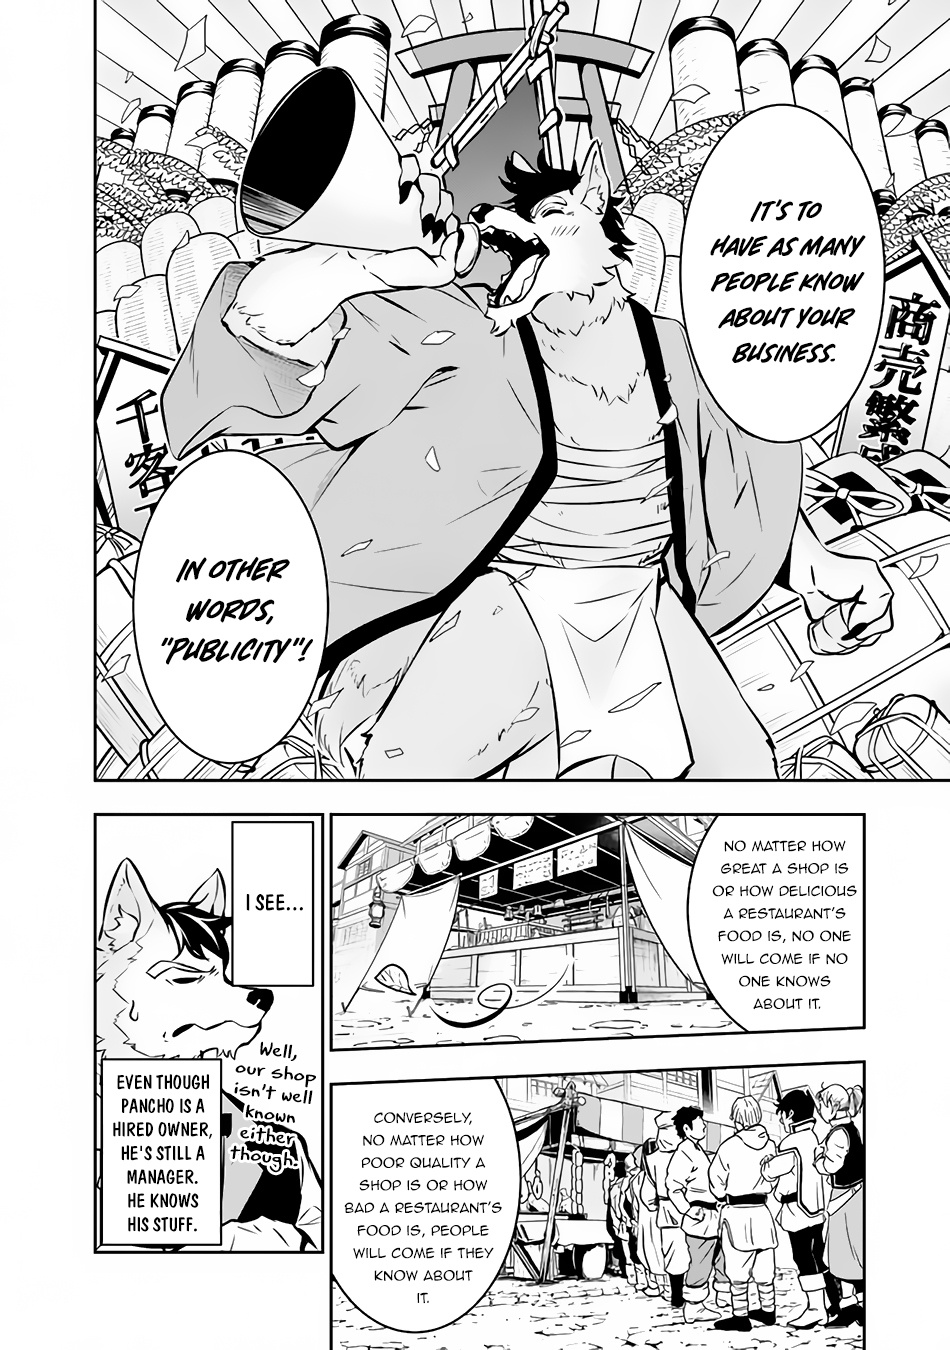 The Strongest Magical Swordsman Ever Reborn As An F-Rank Adventurer. - Page 5